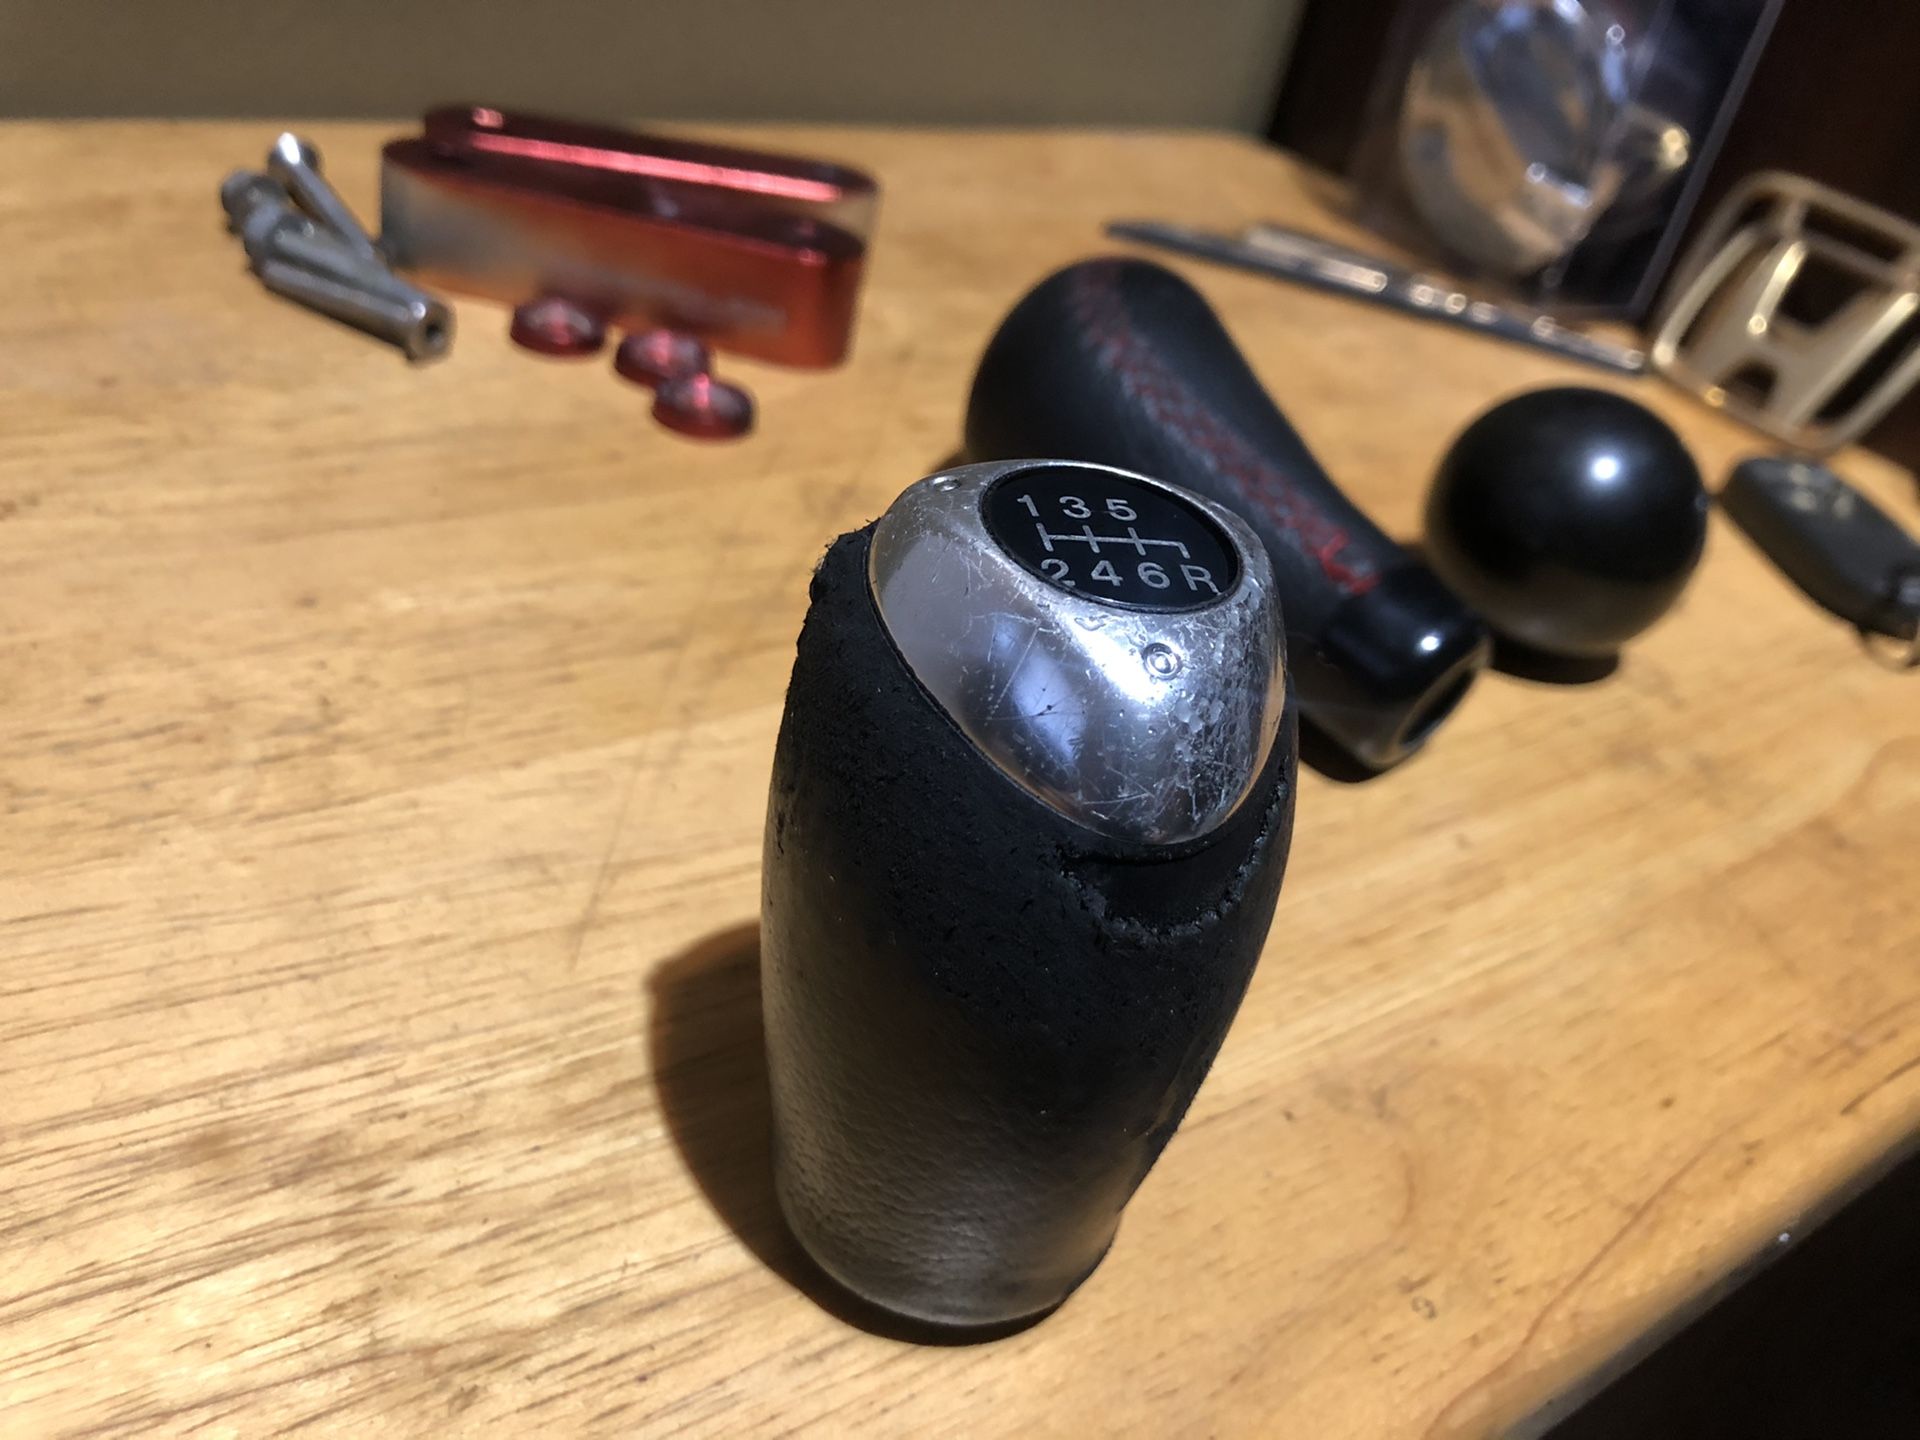 Rx8 shift knob weighted